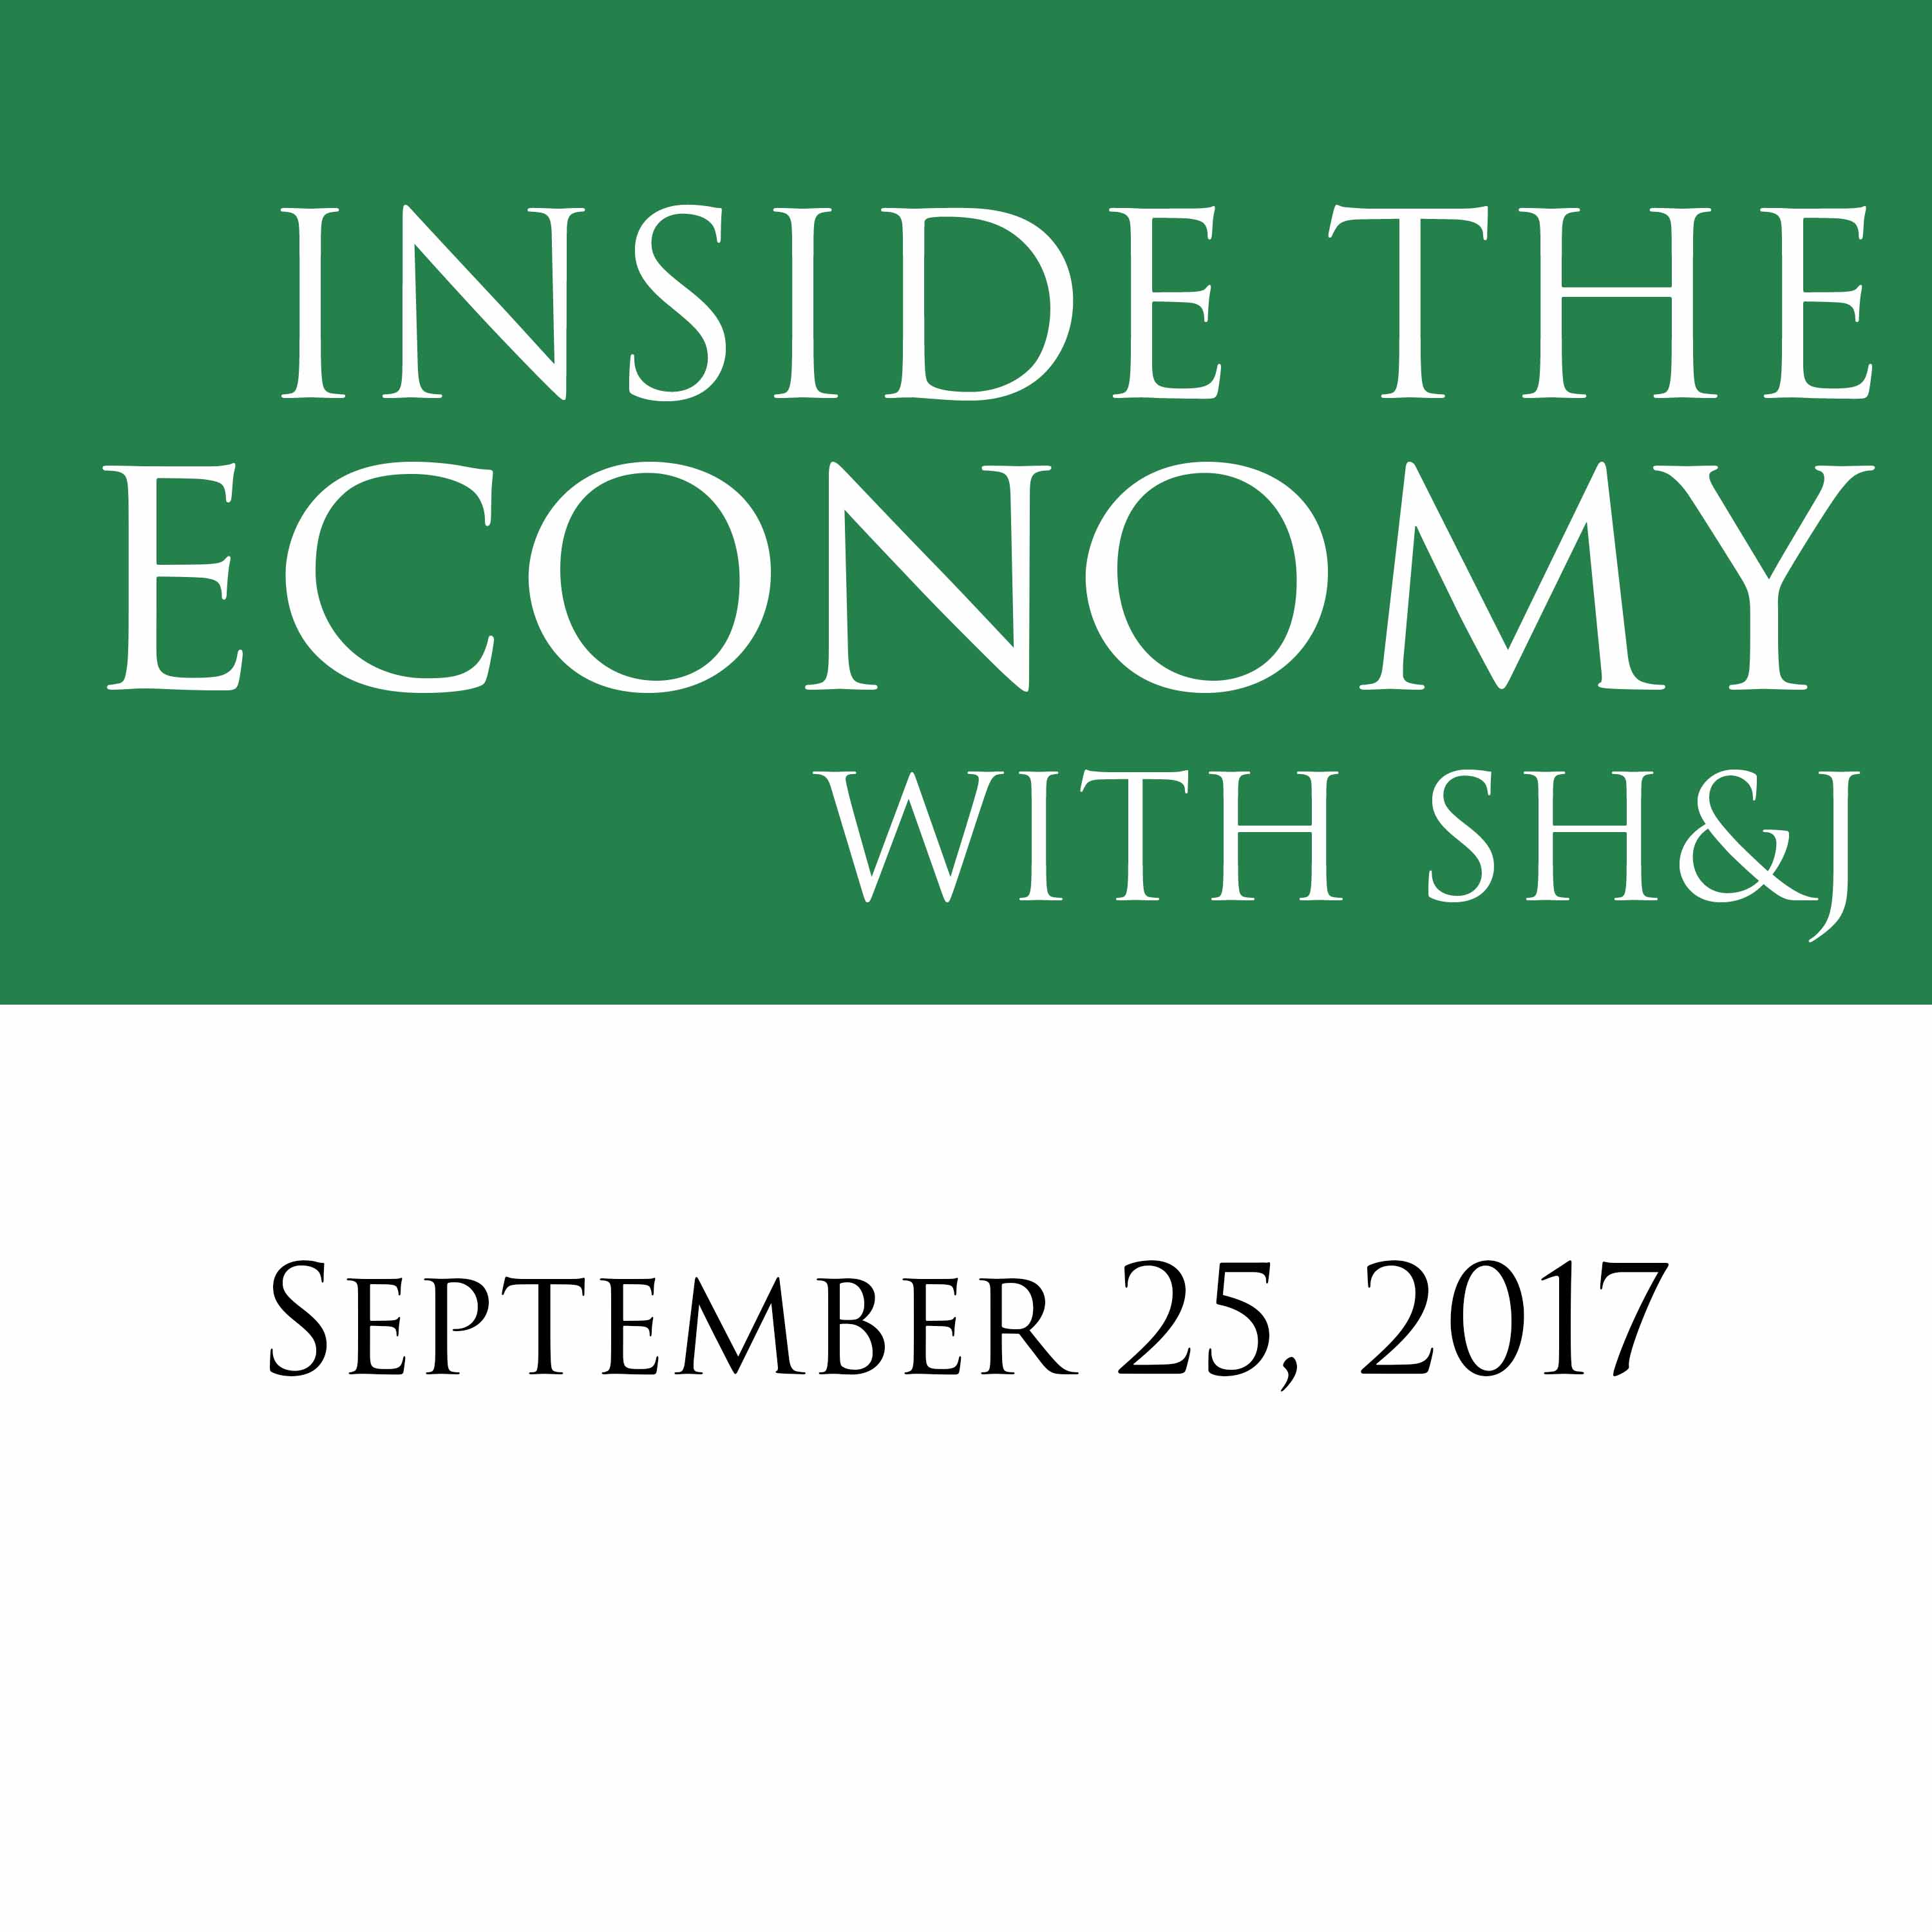 Inside the Economy with SH&J: Gold, the S&P 500, and Saudi Arabia